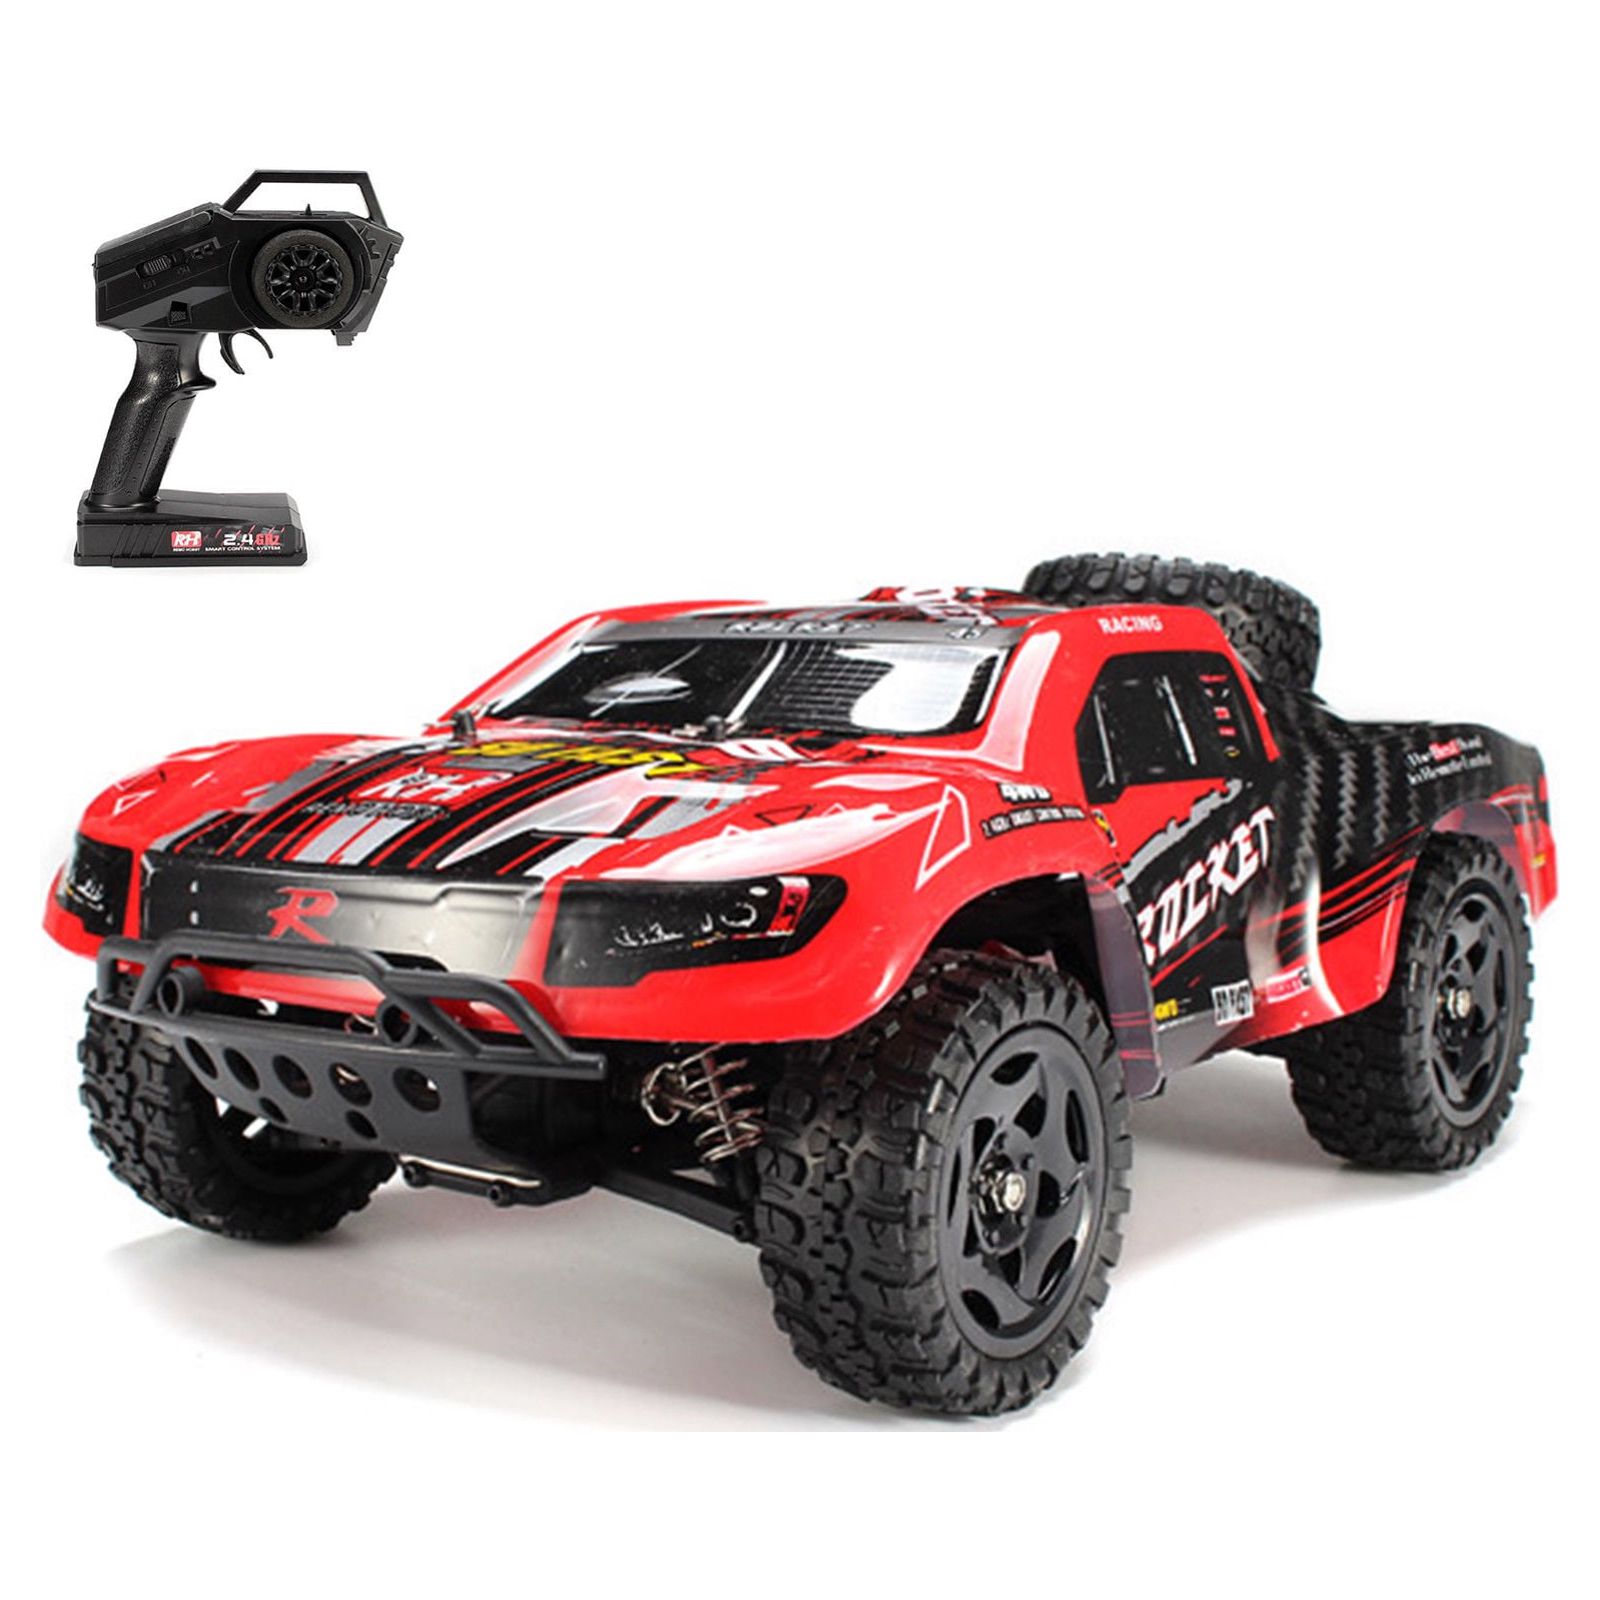 REMO 1621 2.4G 4WD 1/16 50km/h RC Truck Car Waterproof Brushed Short Course - image 1 of 7